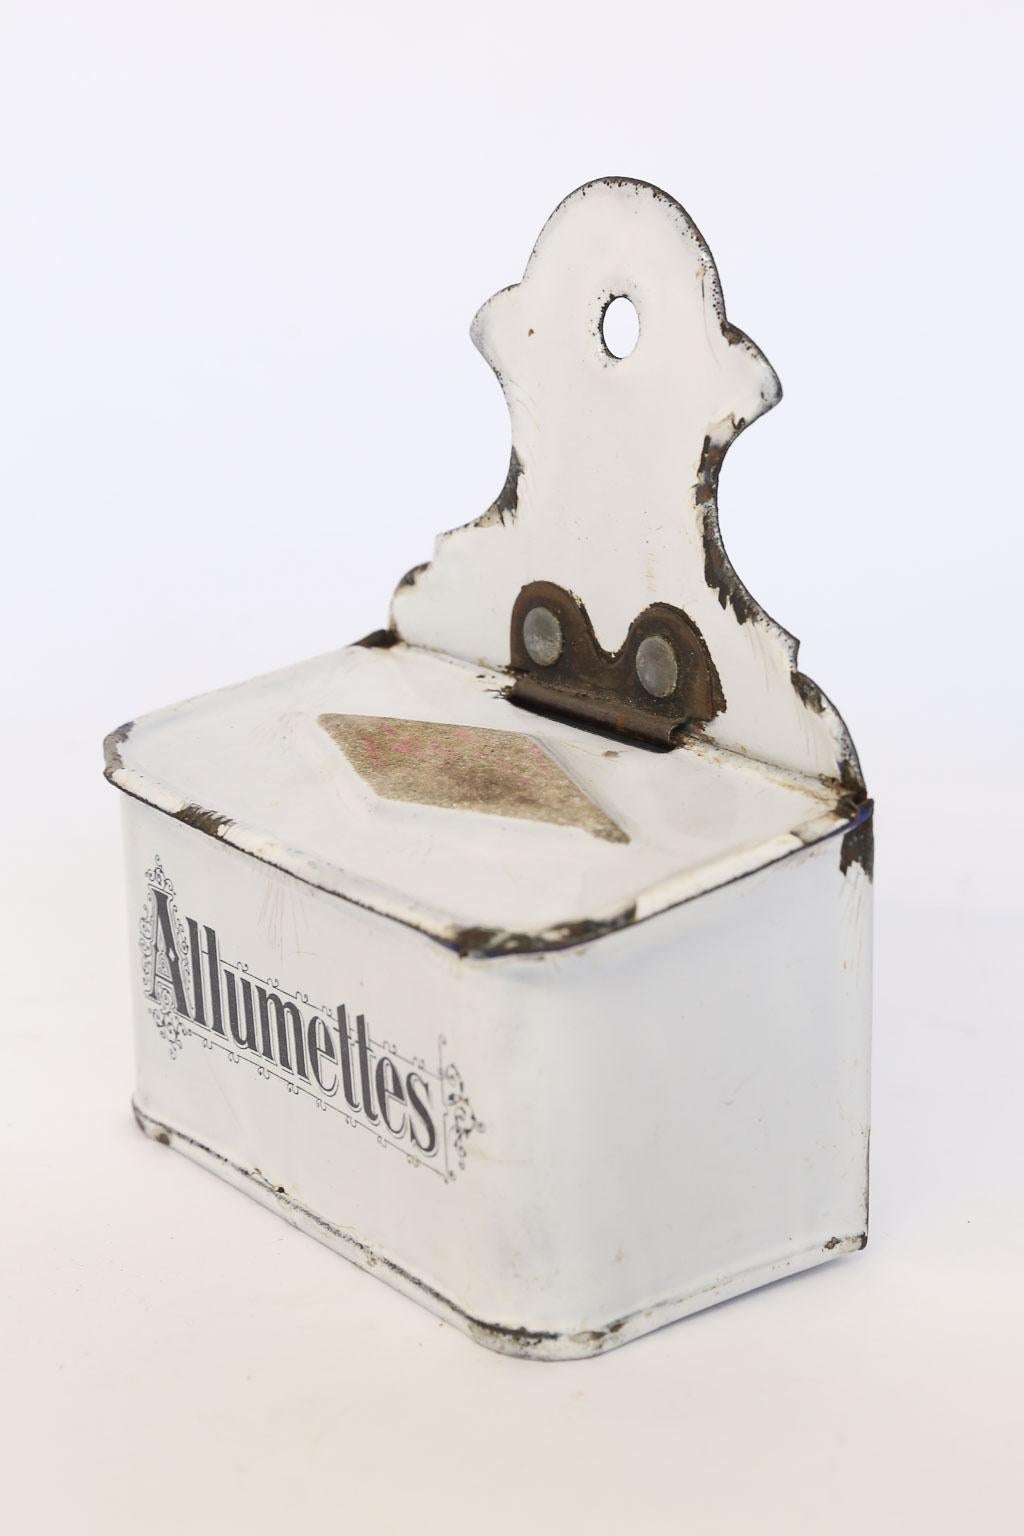 This is an antique French enamel match holder and striker made in the early 1900s. This piece can be wall-mounted or sit alone on a counter or tabletop. The lid has a strike patch on the top for lighting matches and lifts to reveal the stored